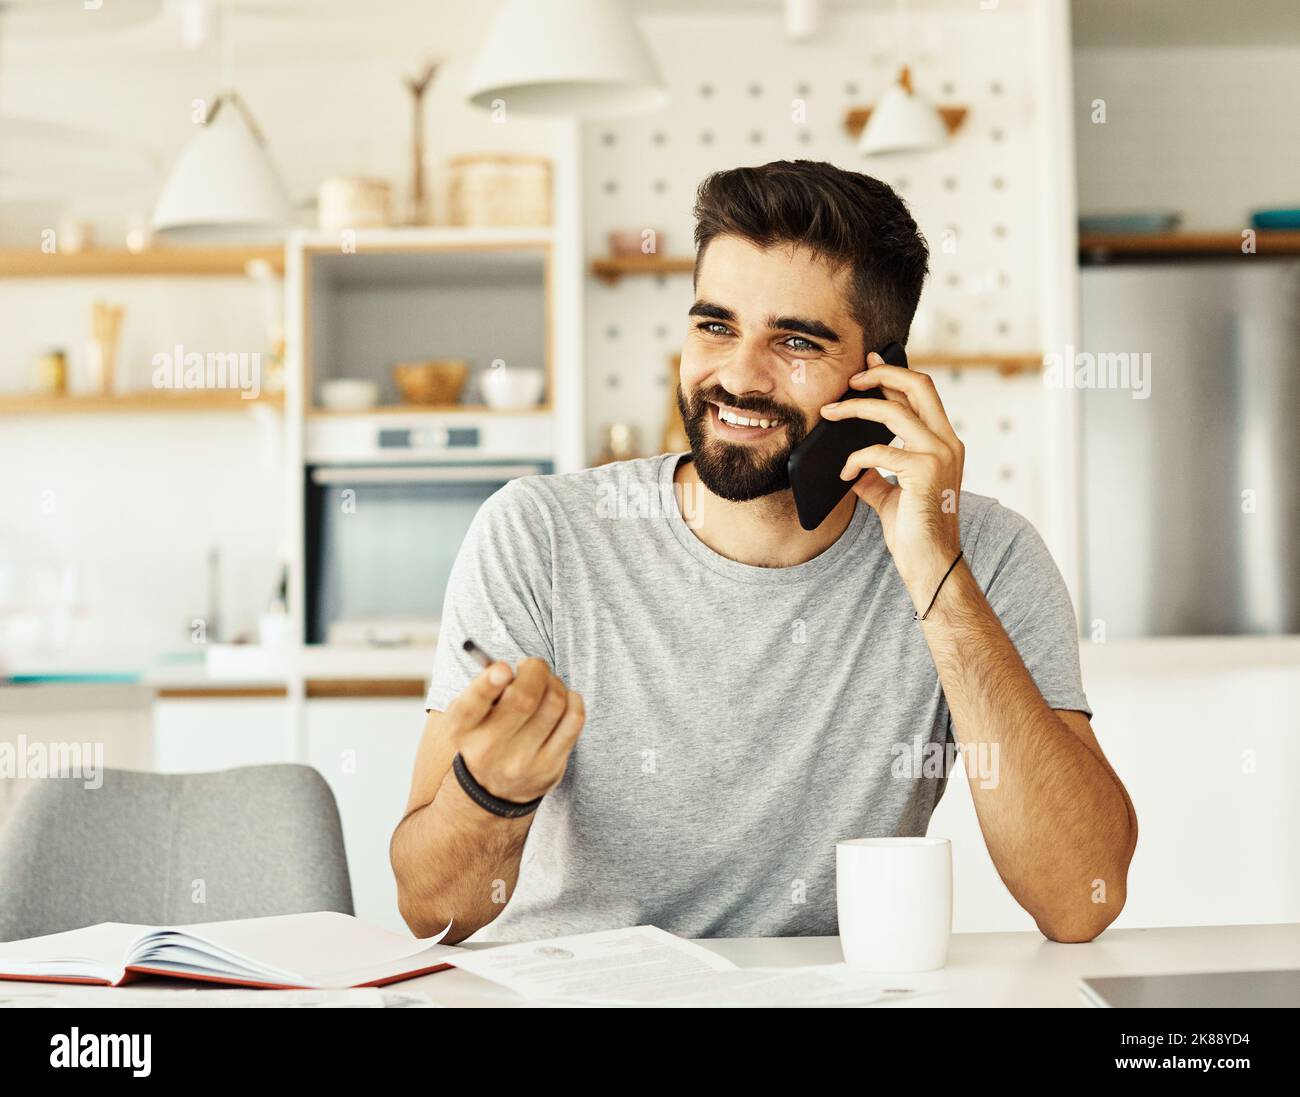 man phone home technology communication mobile smartphone call office adult young business smiling Stock Photo